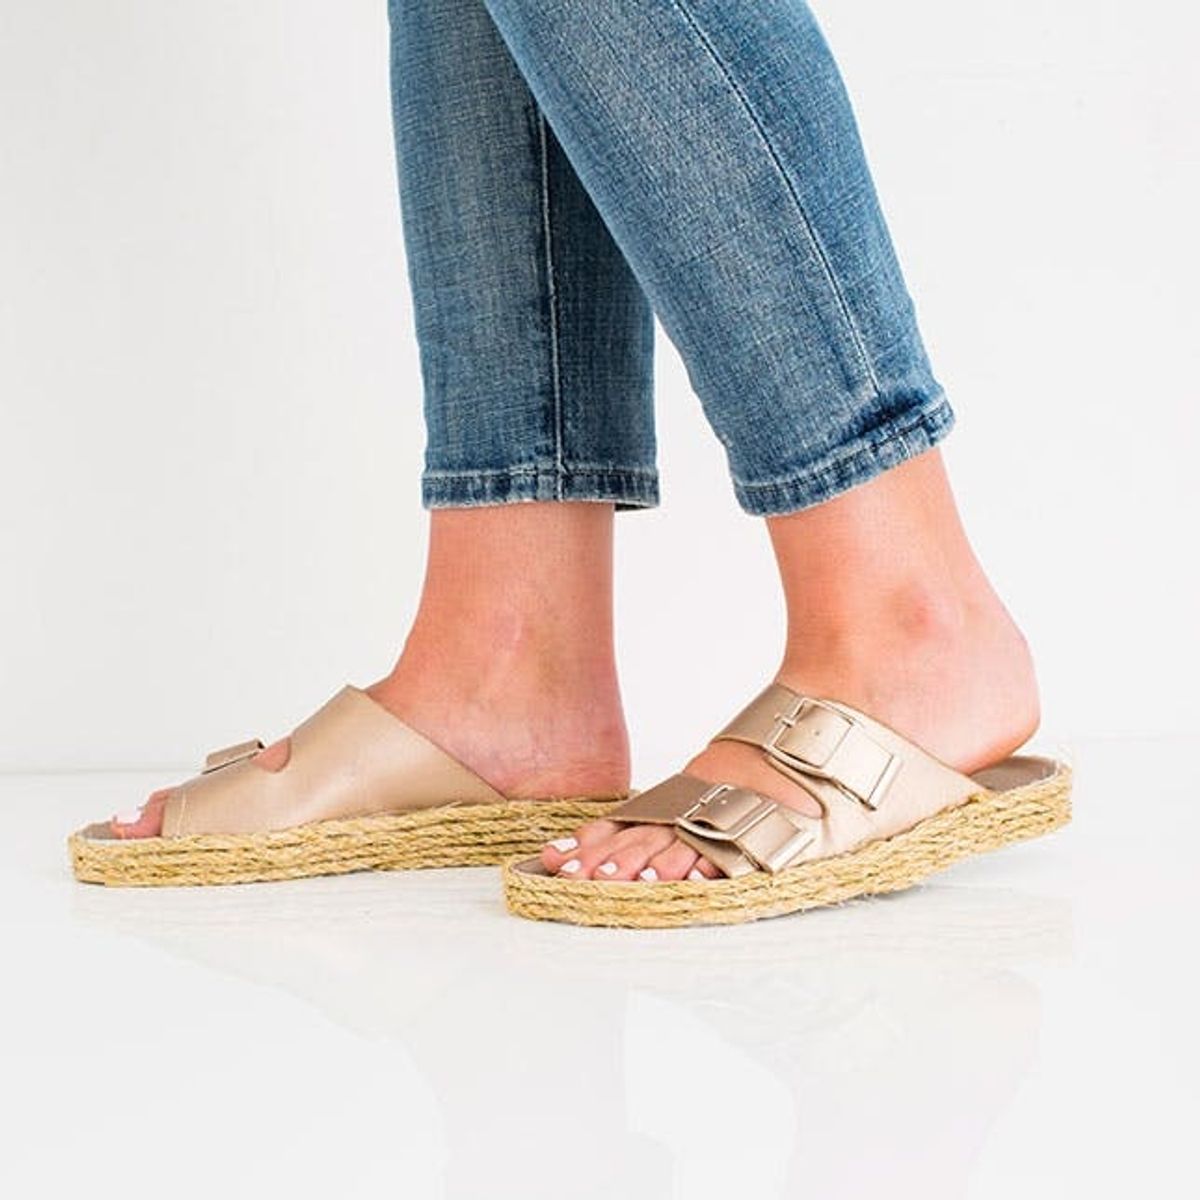 Yes, You Can Make Your Own Espadrilles — Here’s How!